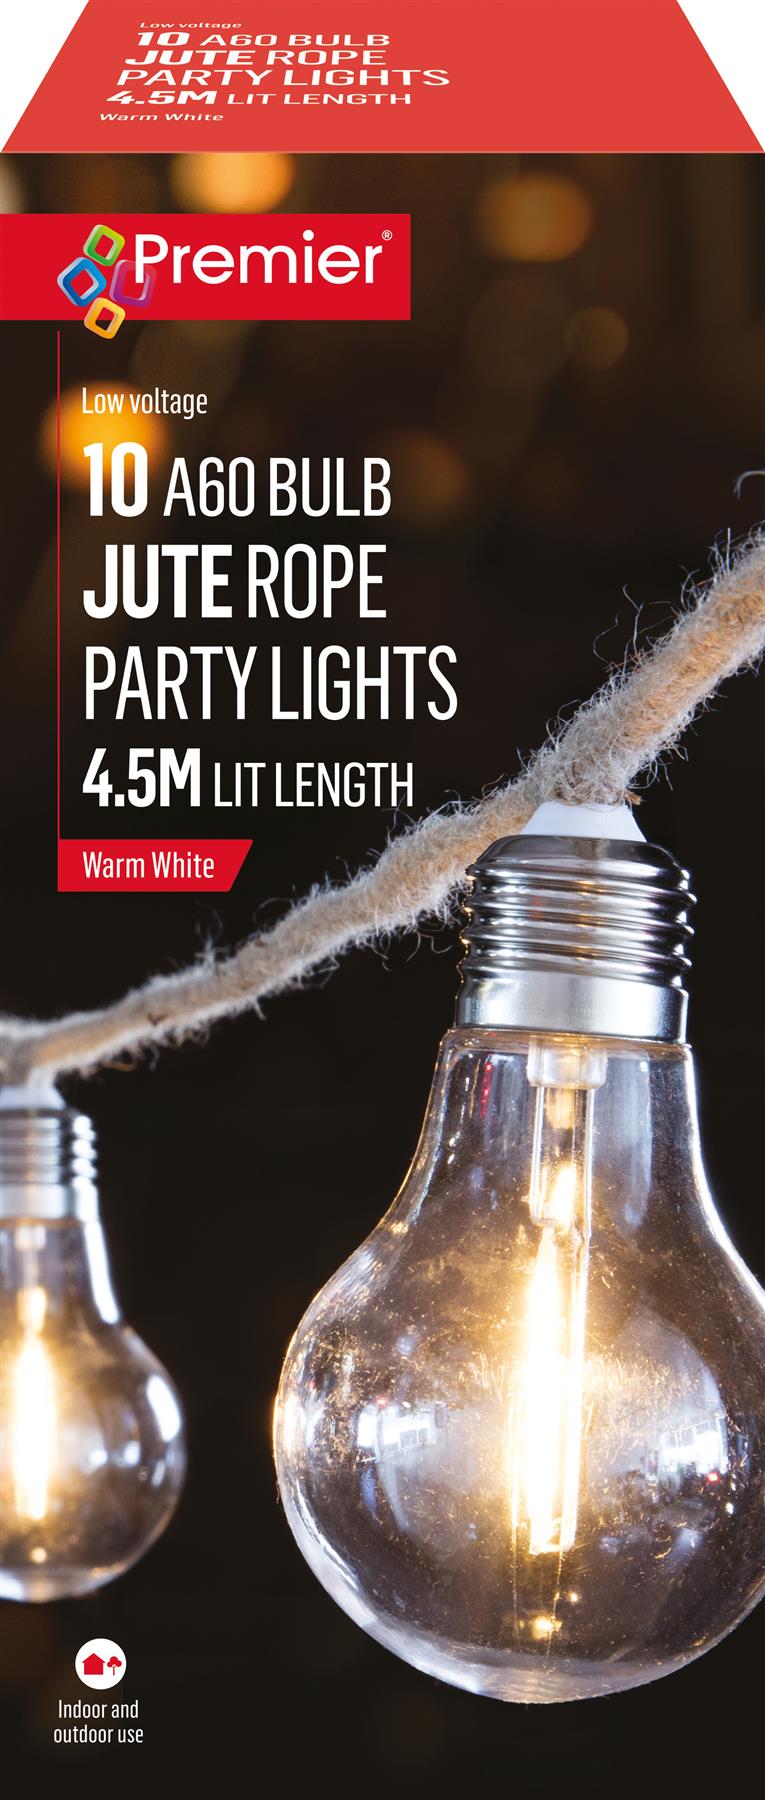 10 Jute Rope Party Lights